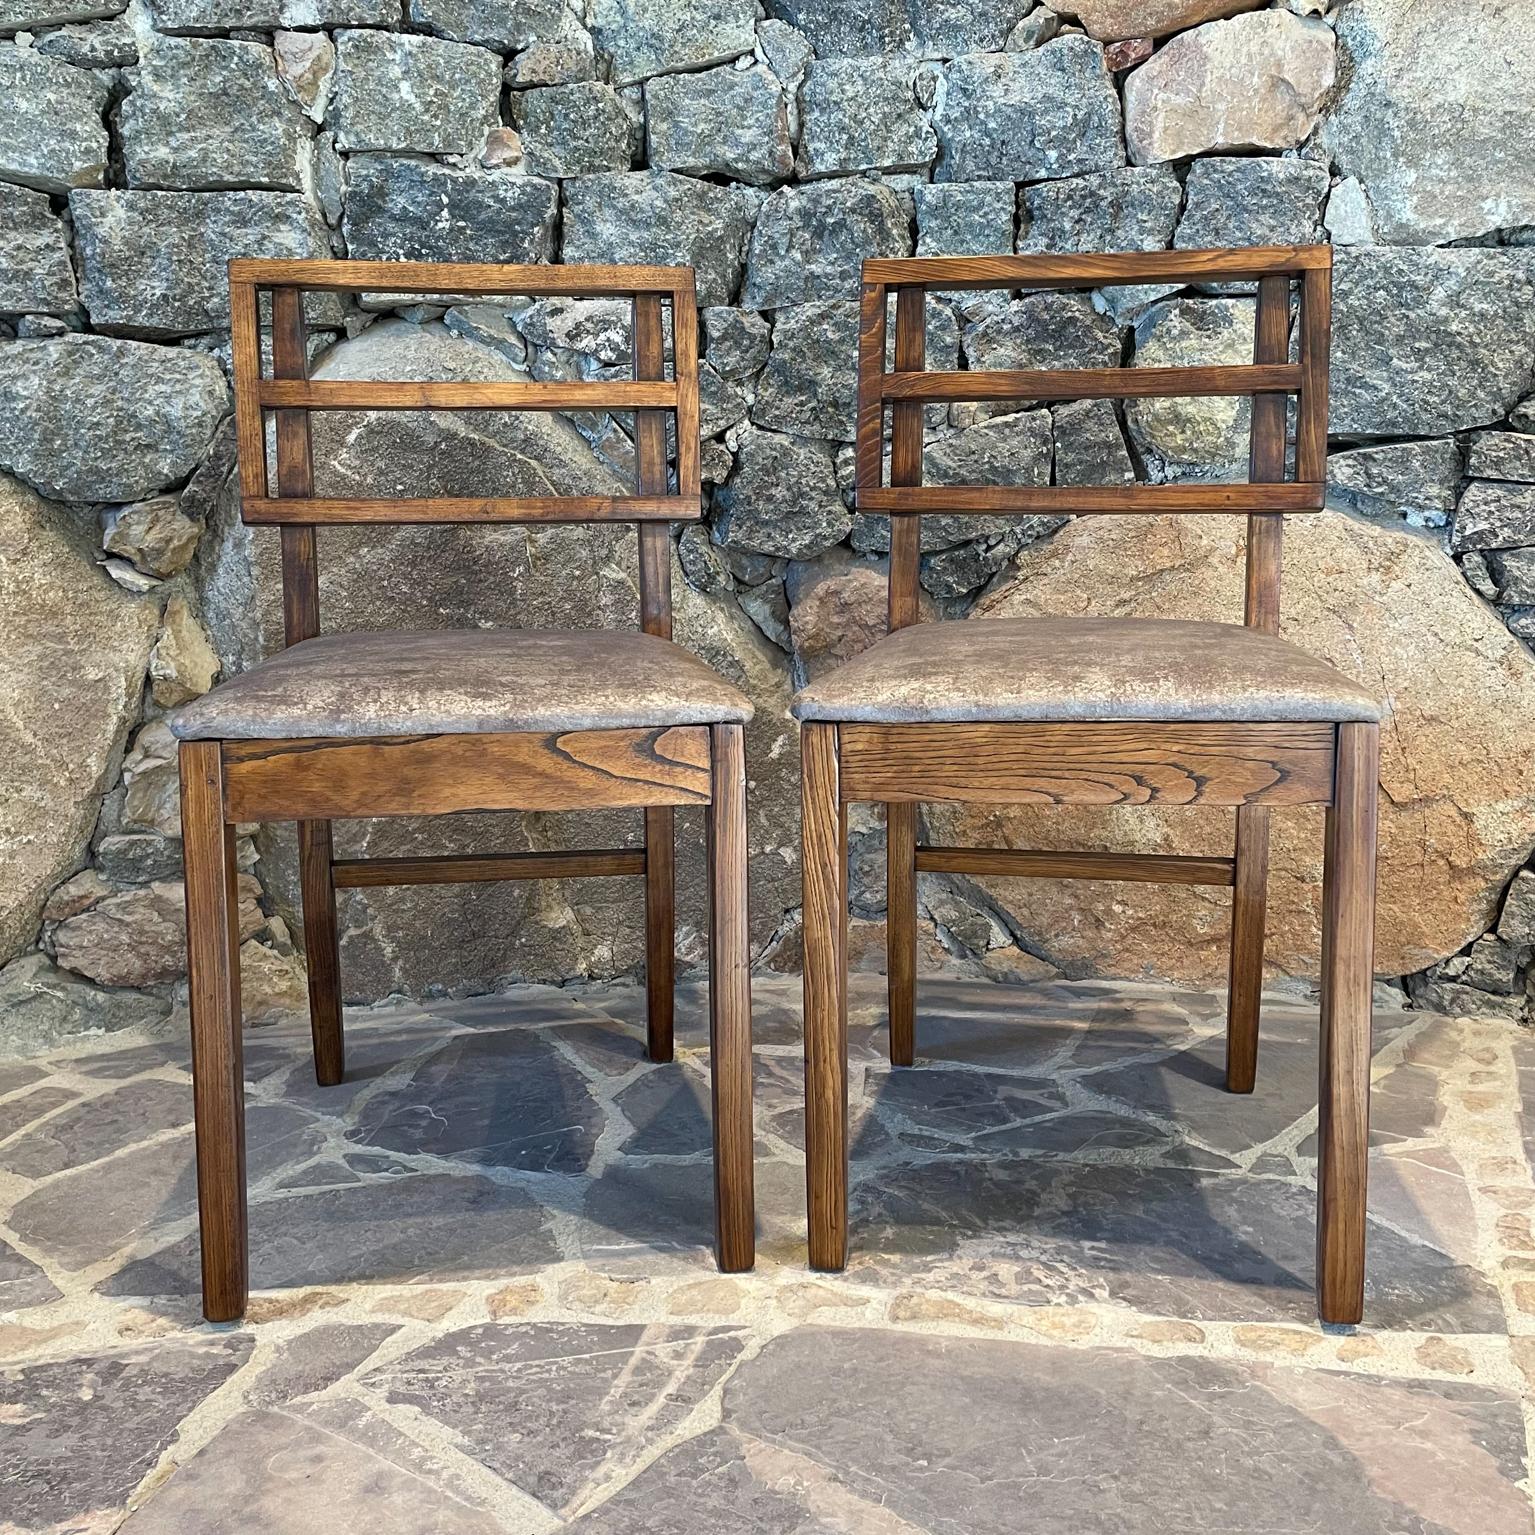 Chairs
Modern pair of side chairs in oak wood style of Paul Laszlo USA 1960s
Unmarked. Selling as a pair.
Measures: 31.5 H x 17 W x 18.75 D Seat: H 18 inches
Original vintage condition preowned. Refinished. 
New gray textured upholstery, ready to